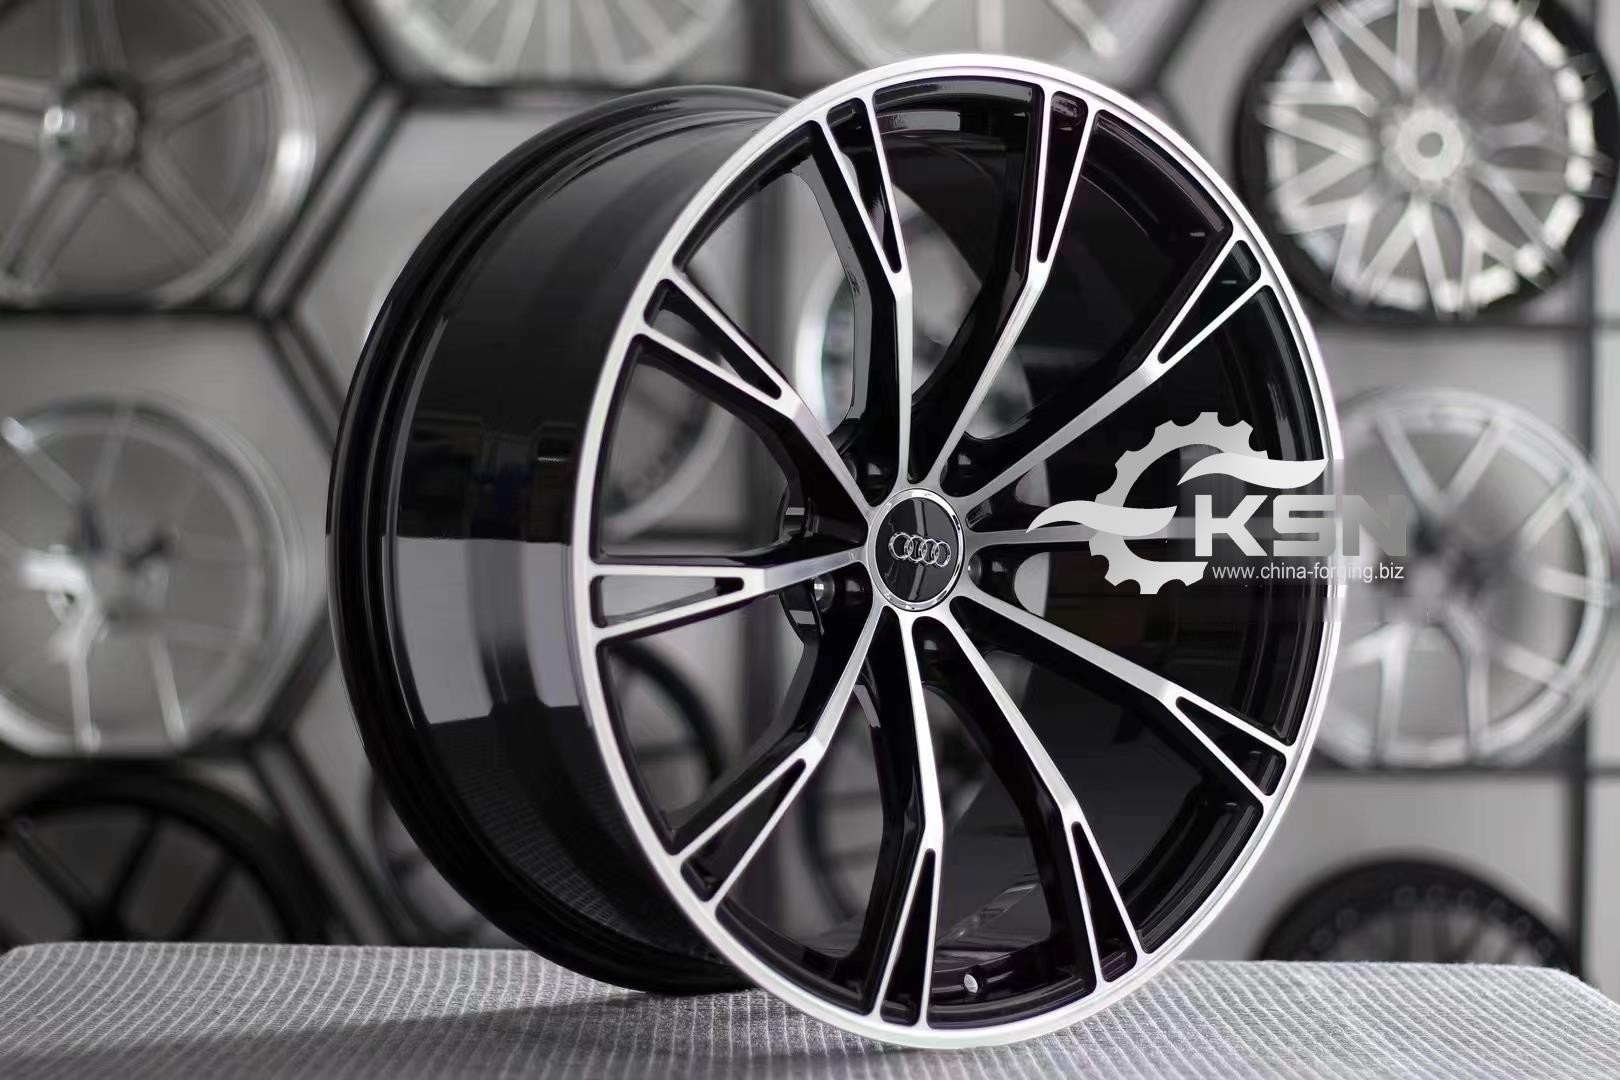 Custom Audi ABT style forging wheels with bright black and machined surface